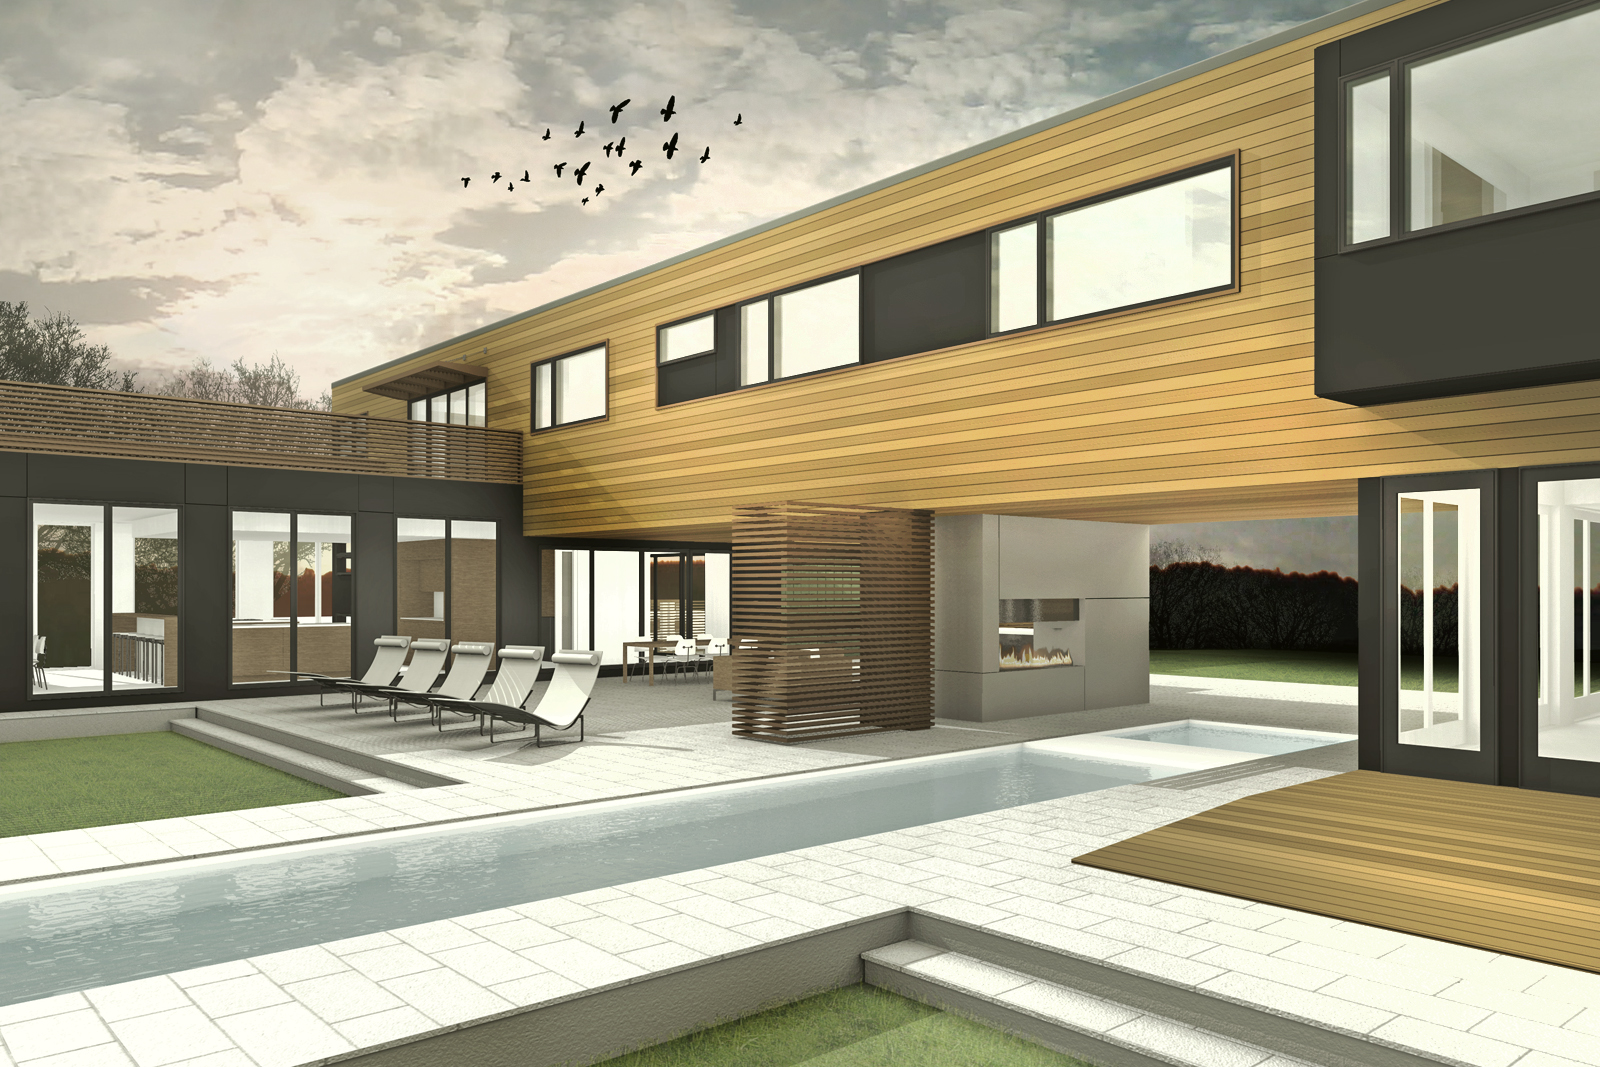 res4-resolution-4-architecture-modern-modular-house-prefab-fithouse-sagaponac-exterior-elevation-perspective-rendering.jpg